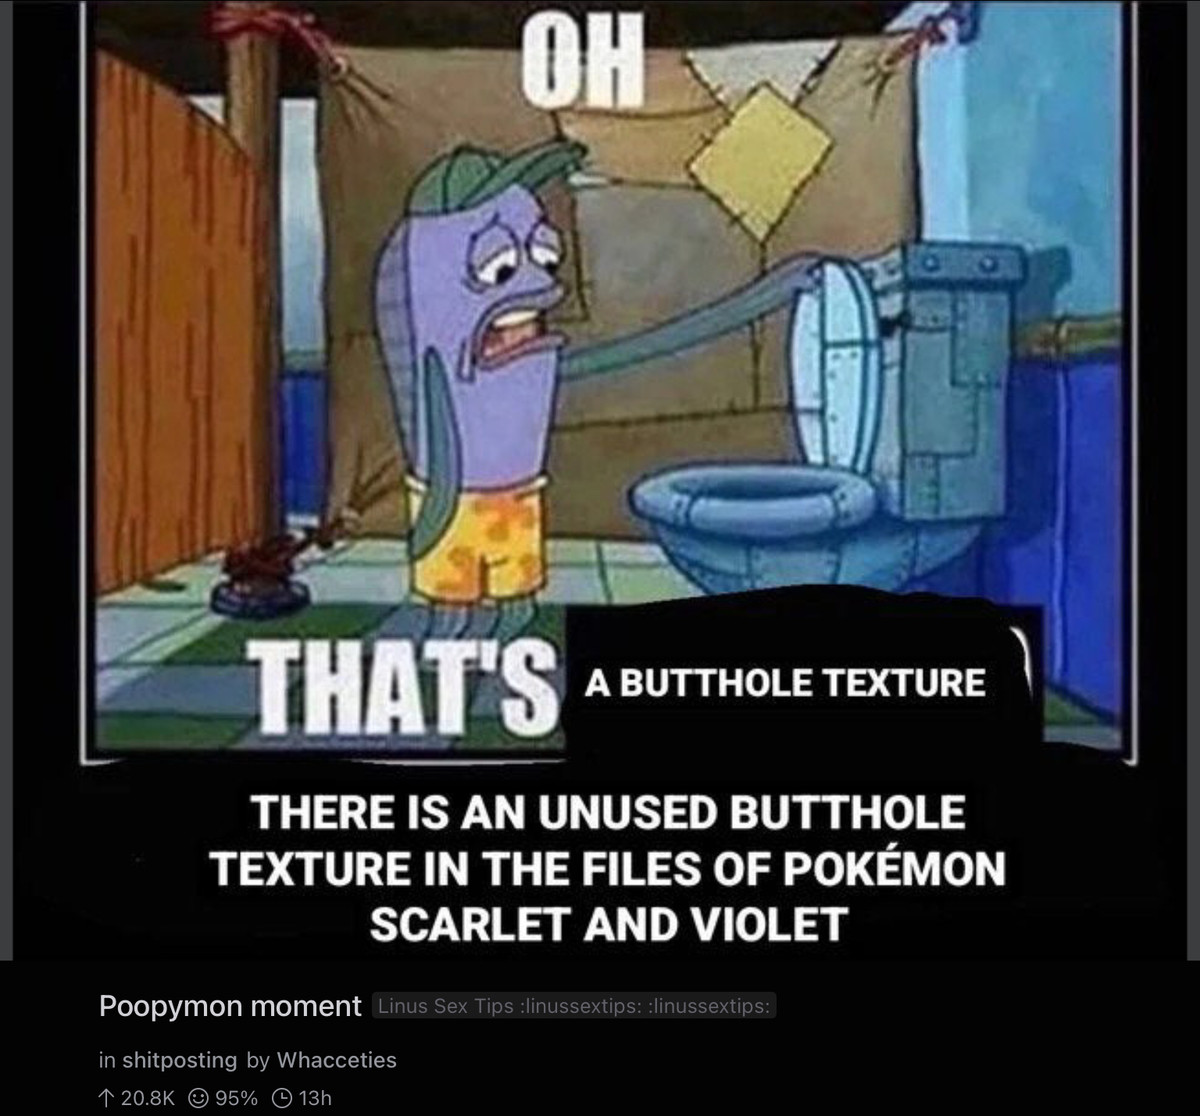 Pokémon booty holes. .. Damn that’s crazy; did you know in System Shock 2, the levels while in the body of the Many are actually an employee’s colonoscopy pictures he gave to the staff